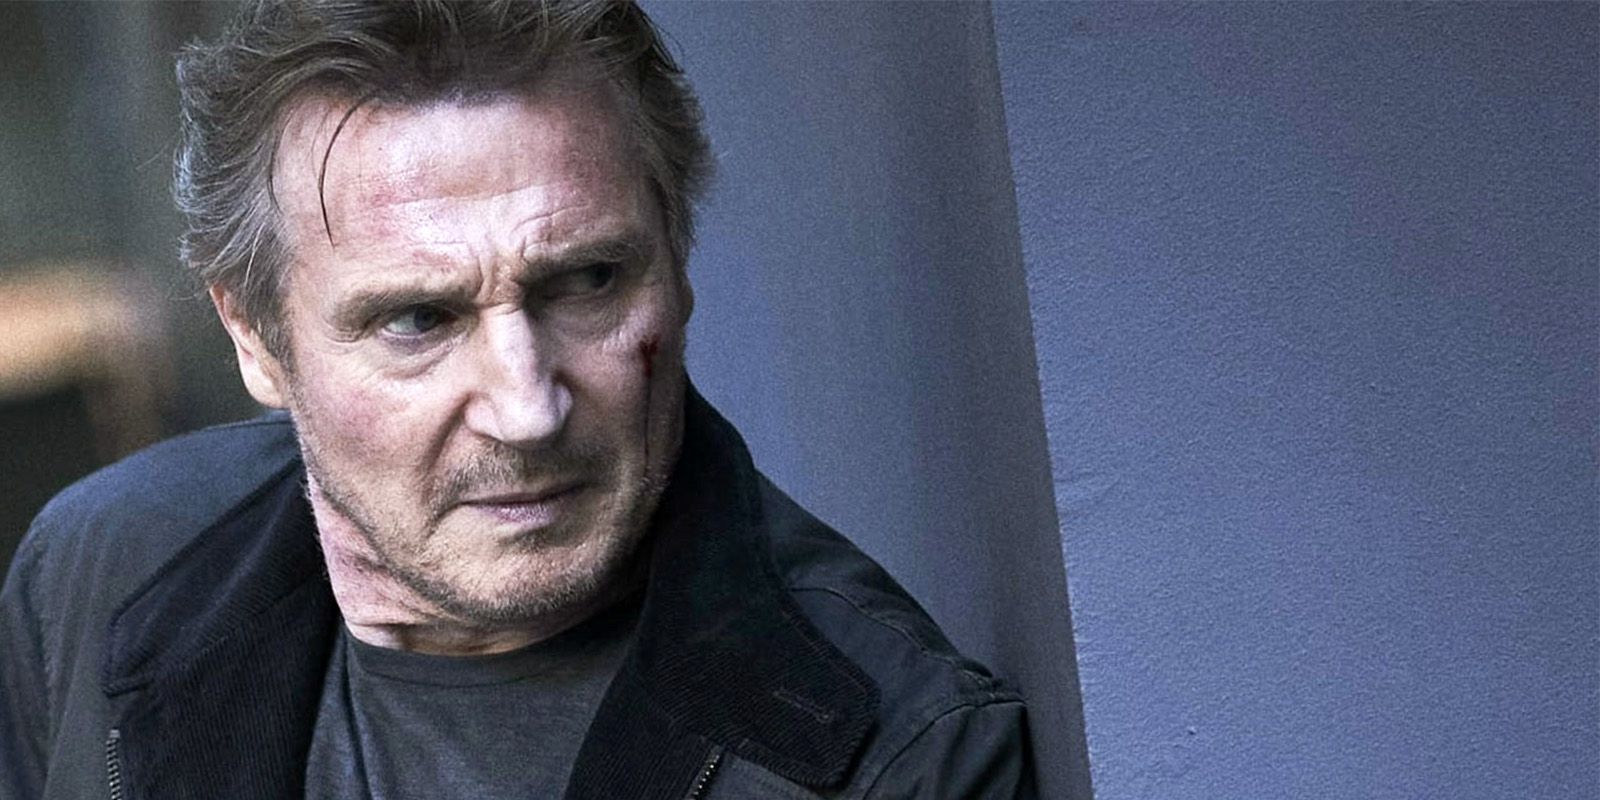 Schindlers List and Taken franchise star Liam Neeson to play the lead role in the upcoming gangster thriller Thug from Rush Hour producers.